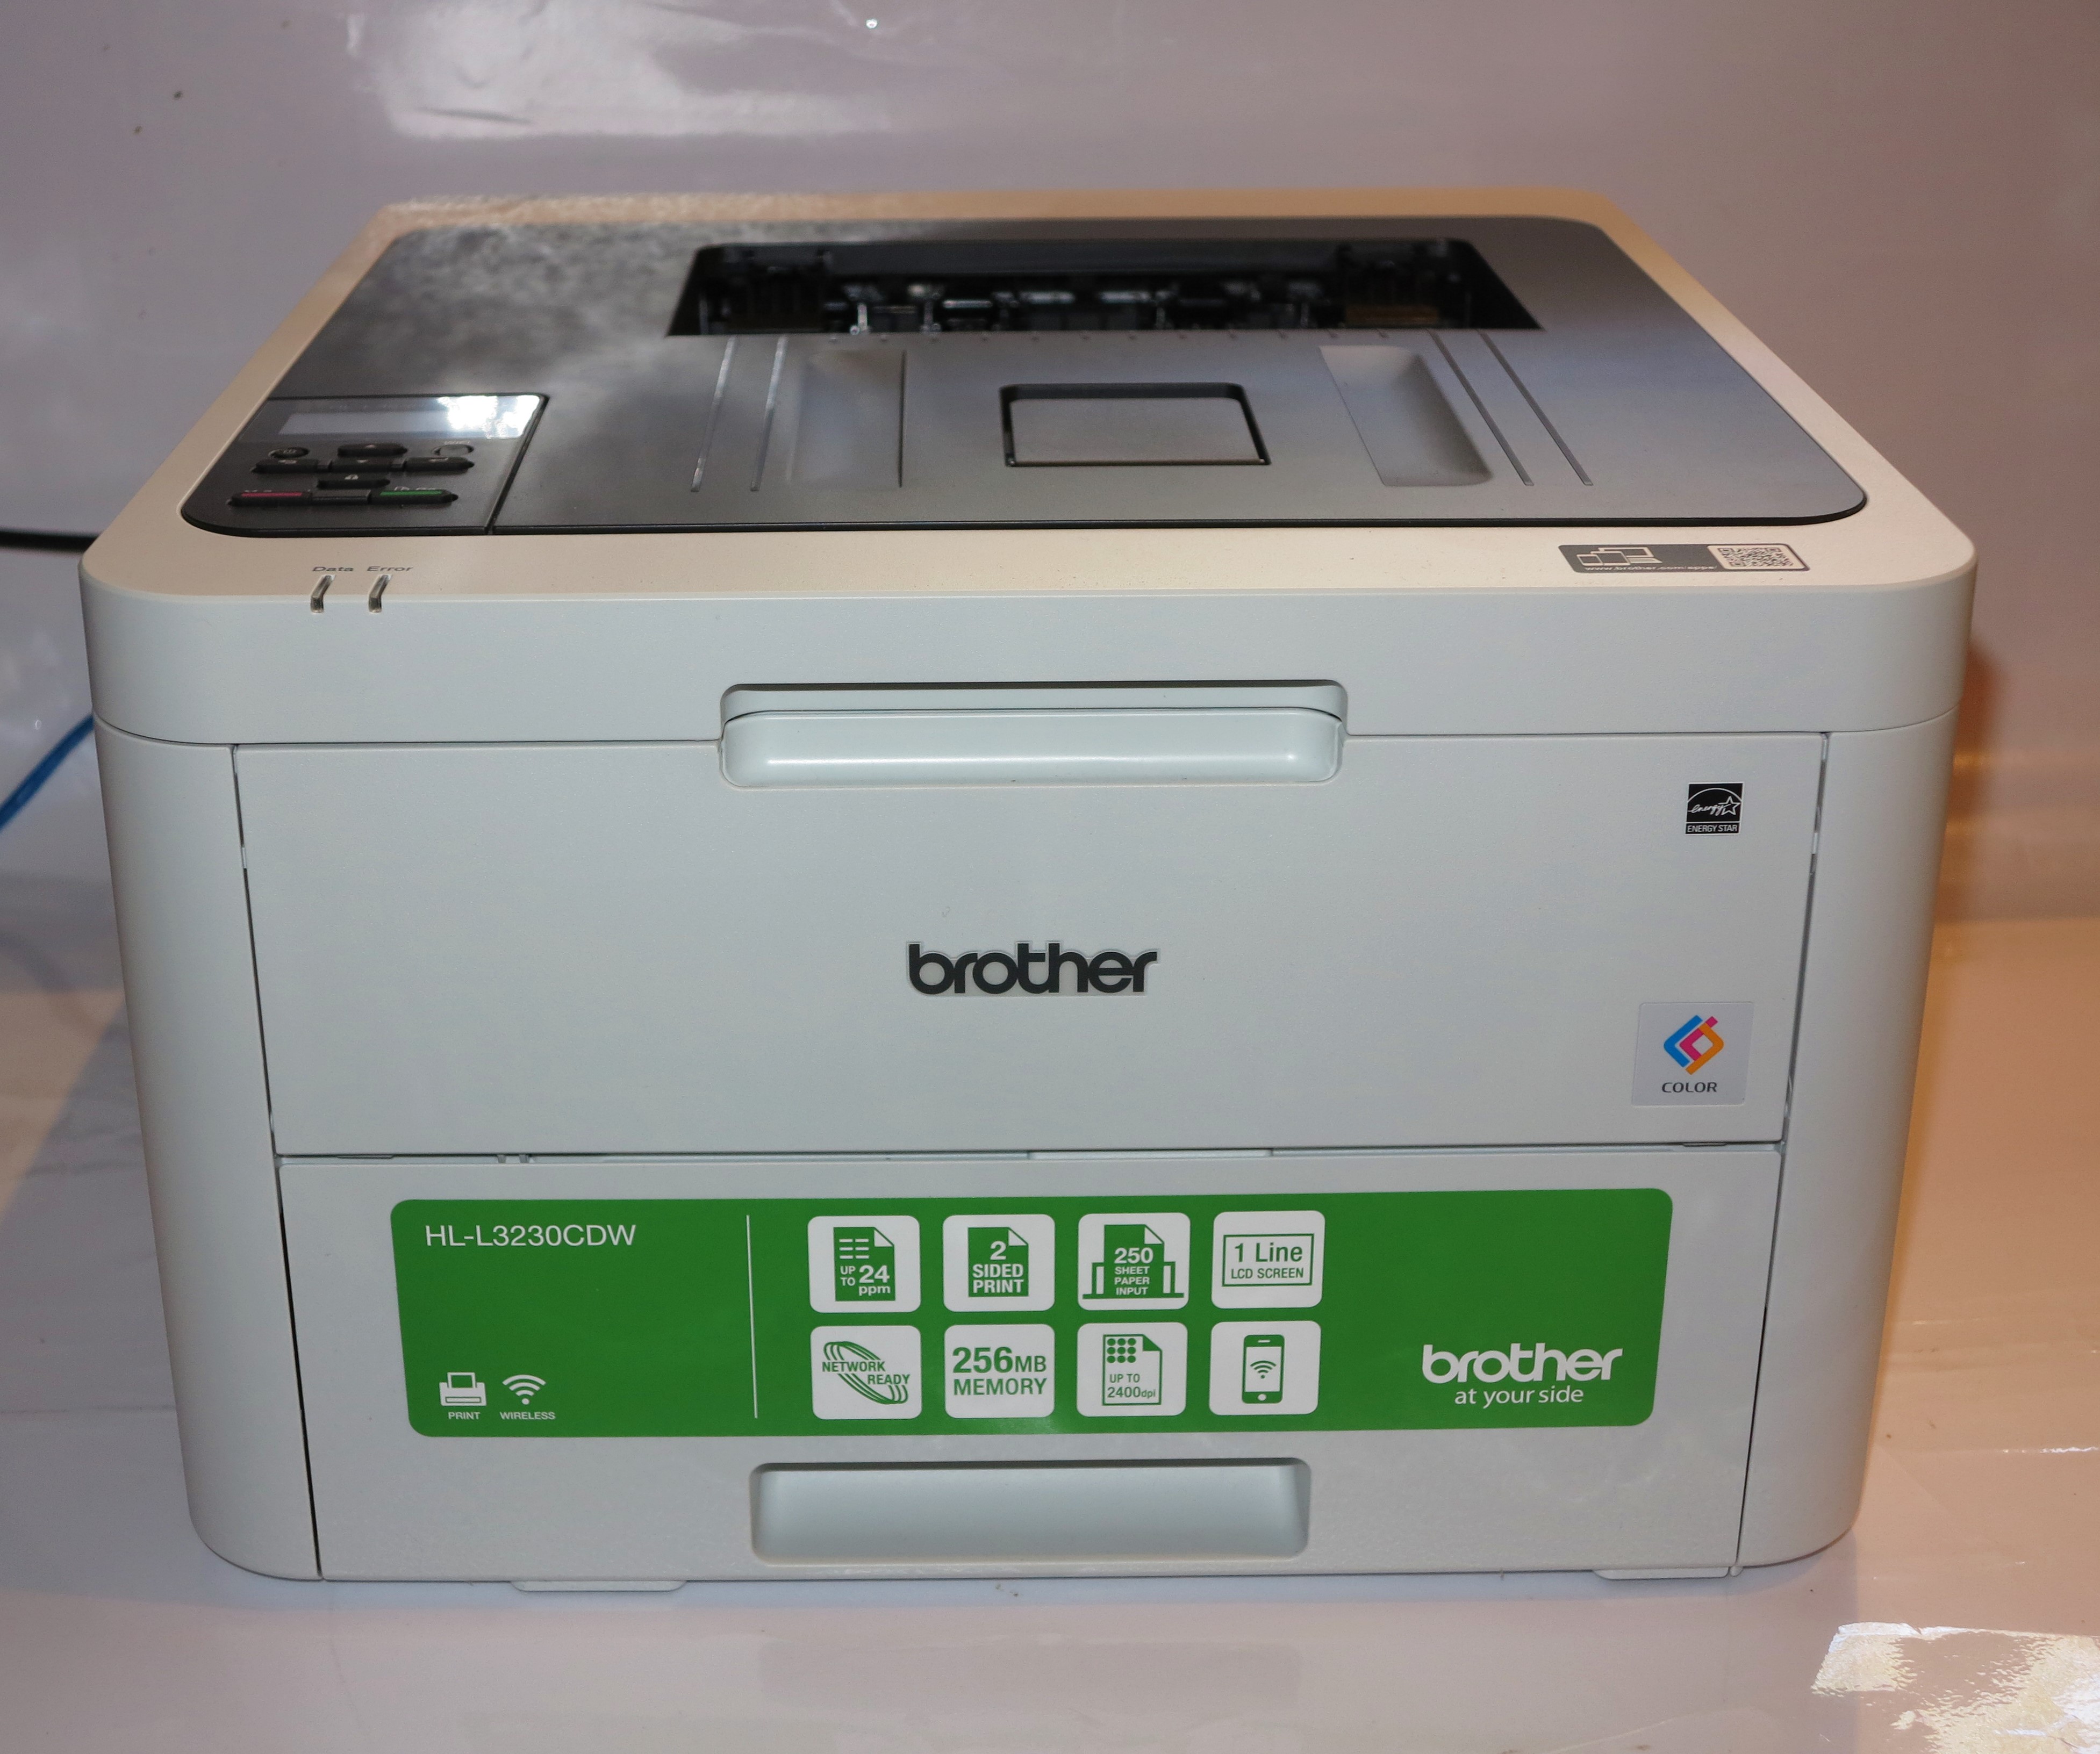 Product Review–Brother HL-L3230CDW Colour LED Printer